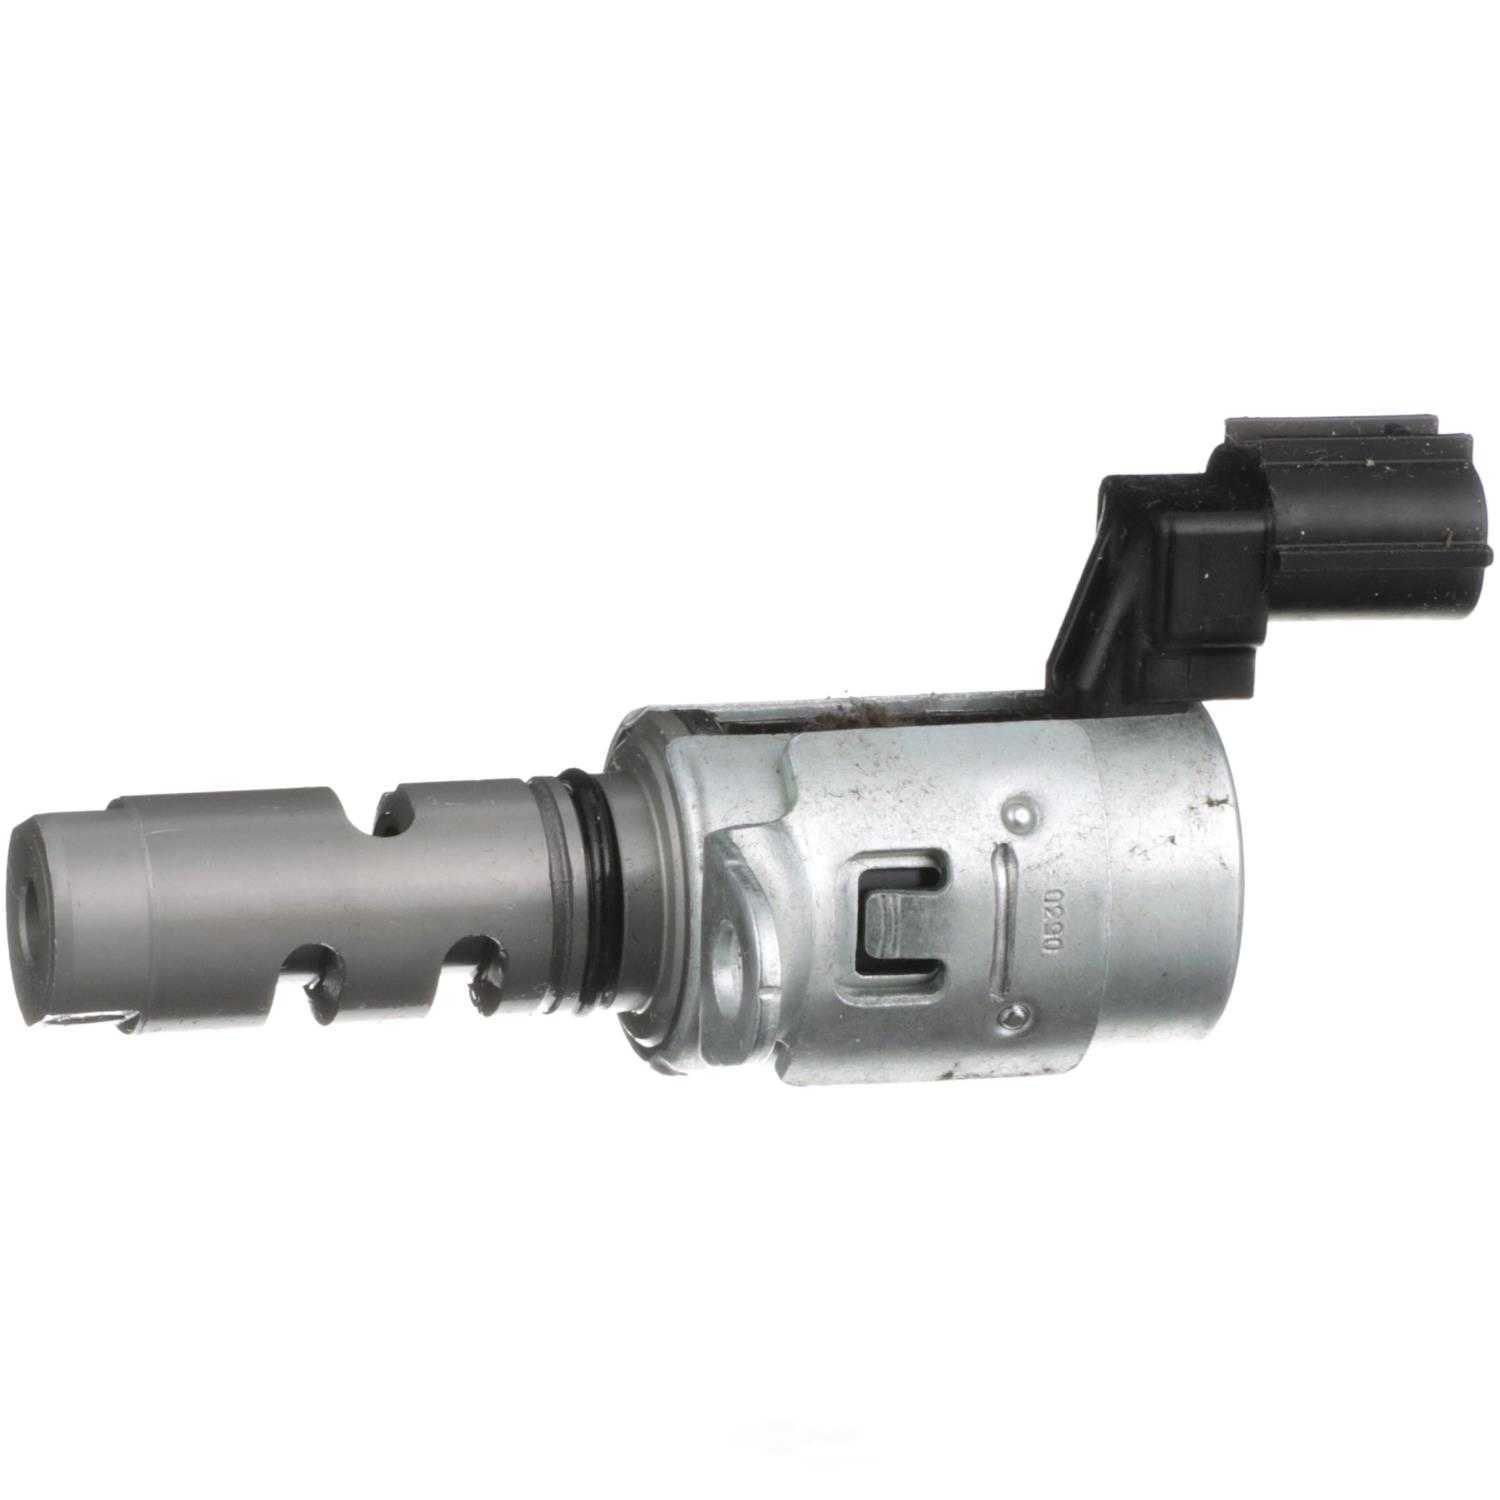 STANDARD MOTOR PRODUCTS - Engine Variable Valve Lift Eccentric Shaft Actuator - STA VVT110